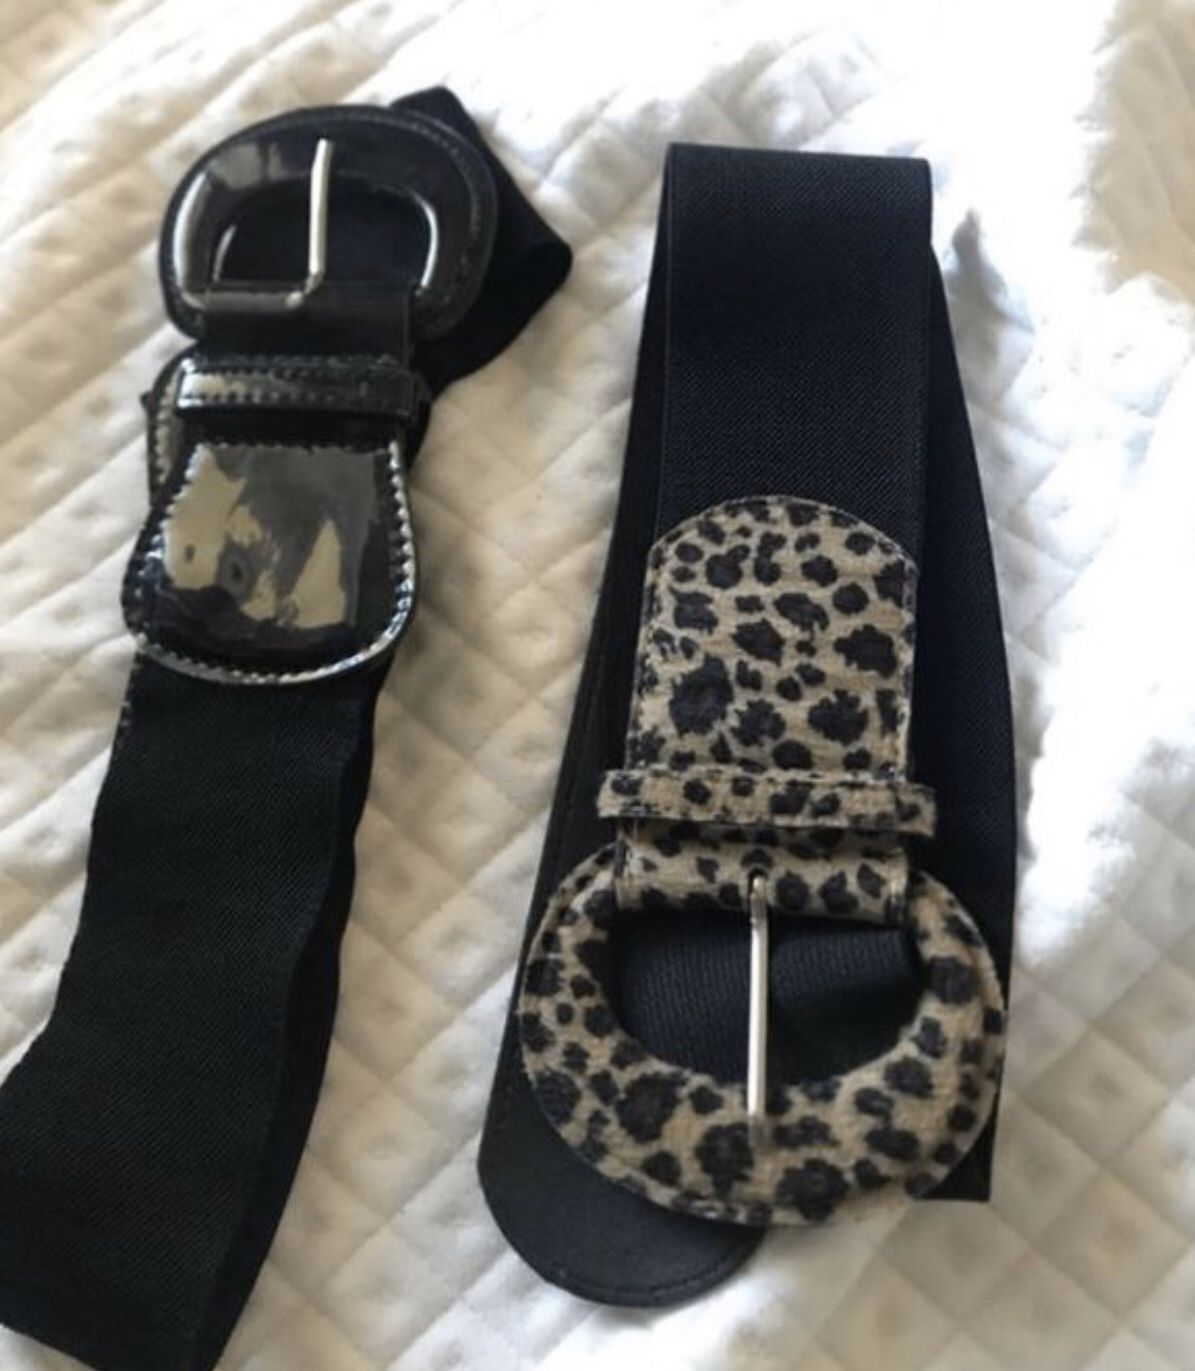 2 womens belts for $1